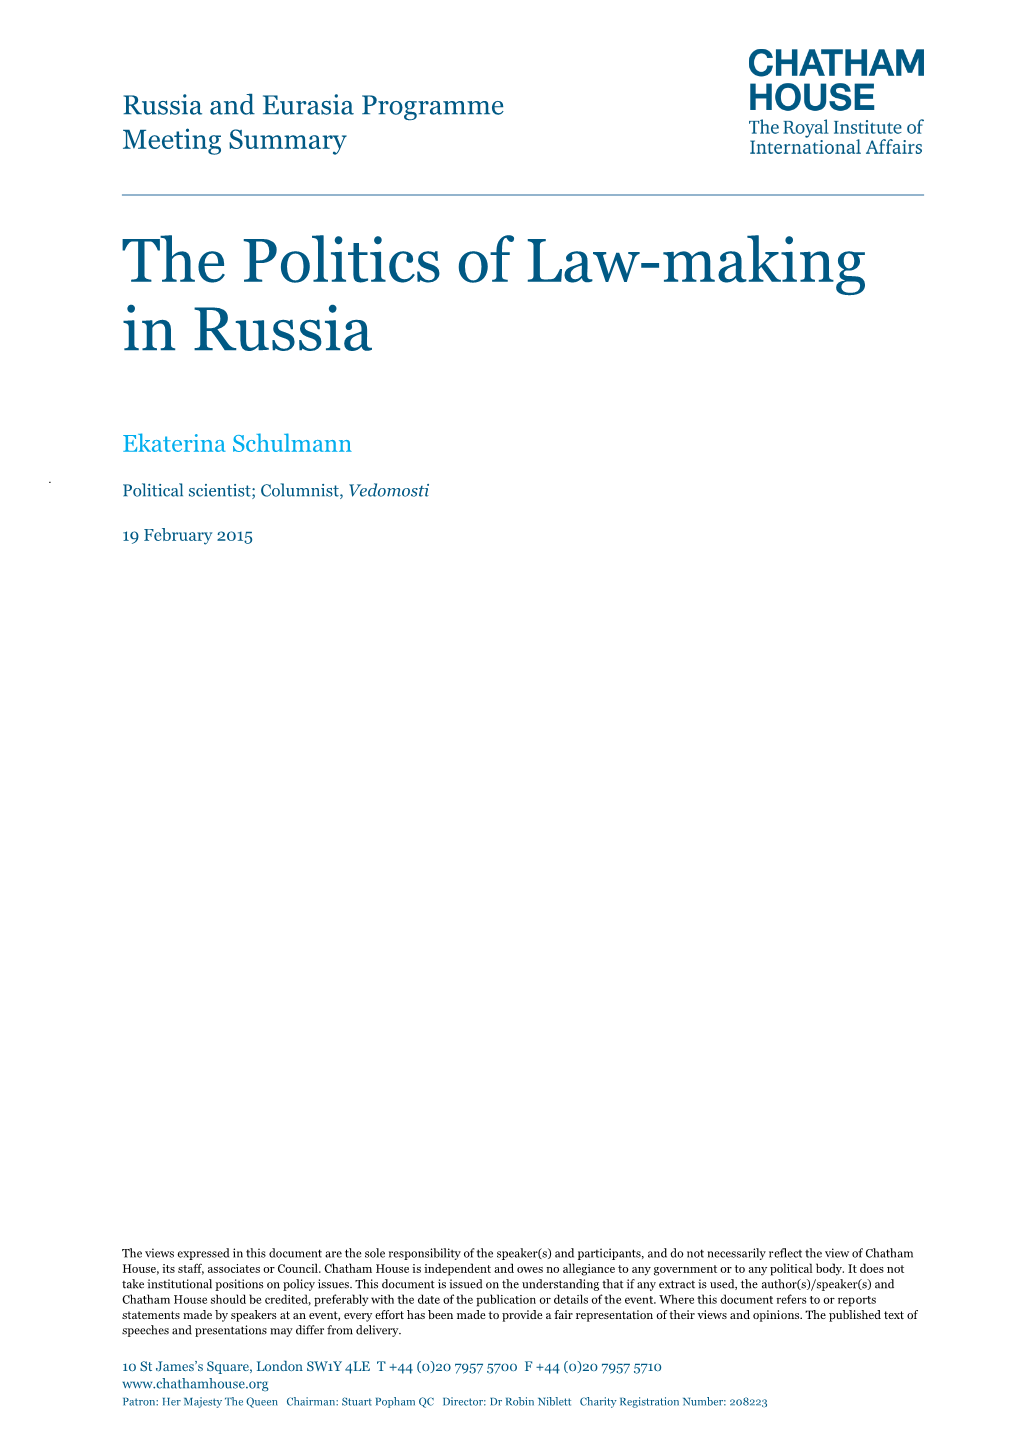 The Politics of Law-Making in Russia